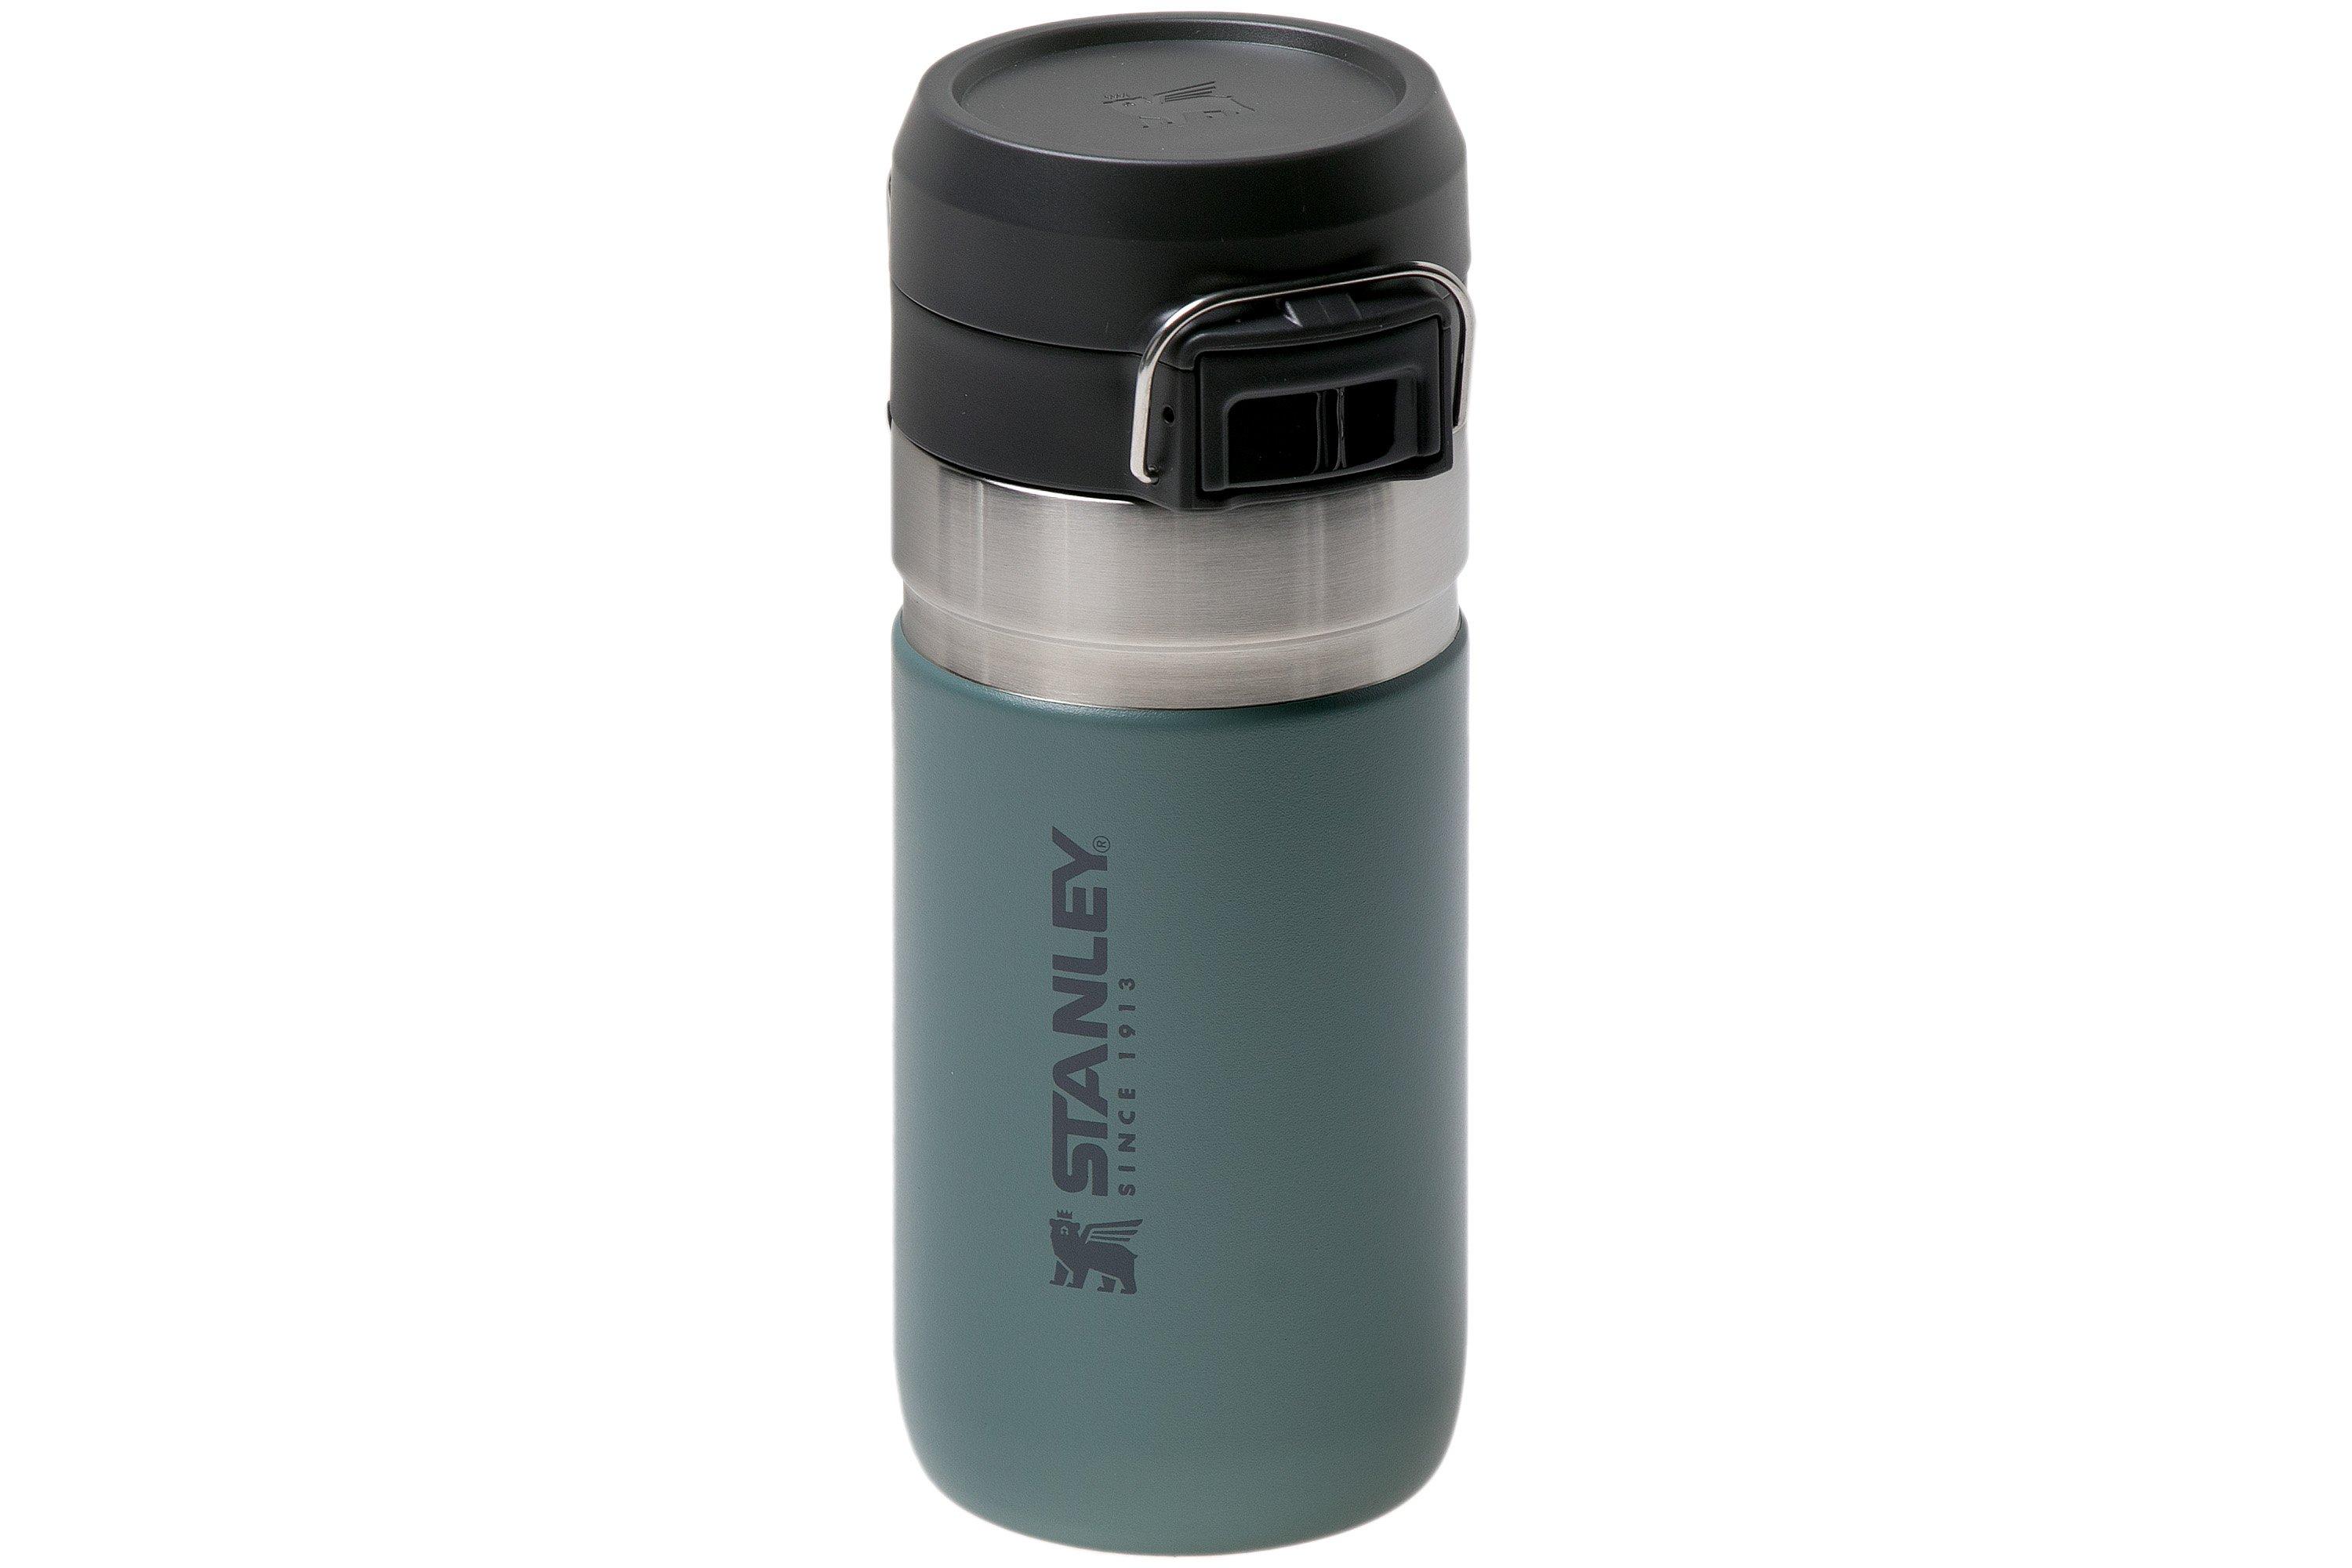 STANLEY Quick Flip Go Insulated 24 oz Lagoon Stainless Steel